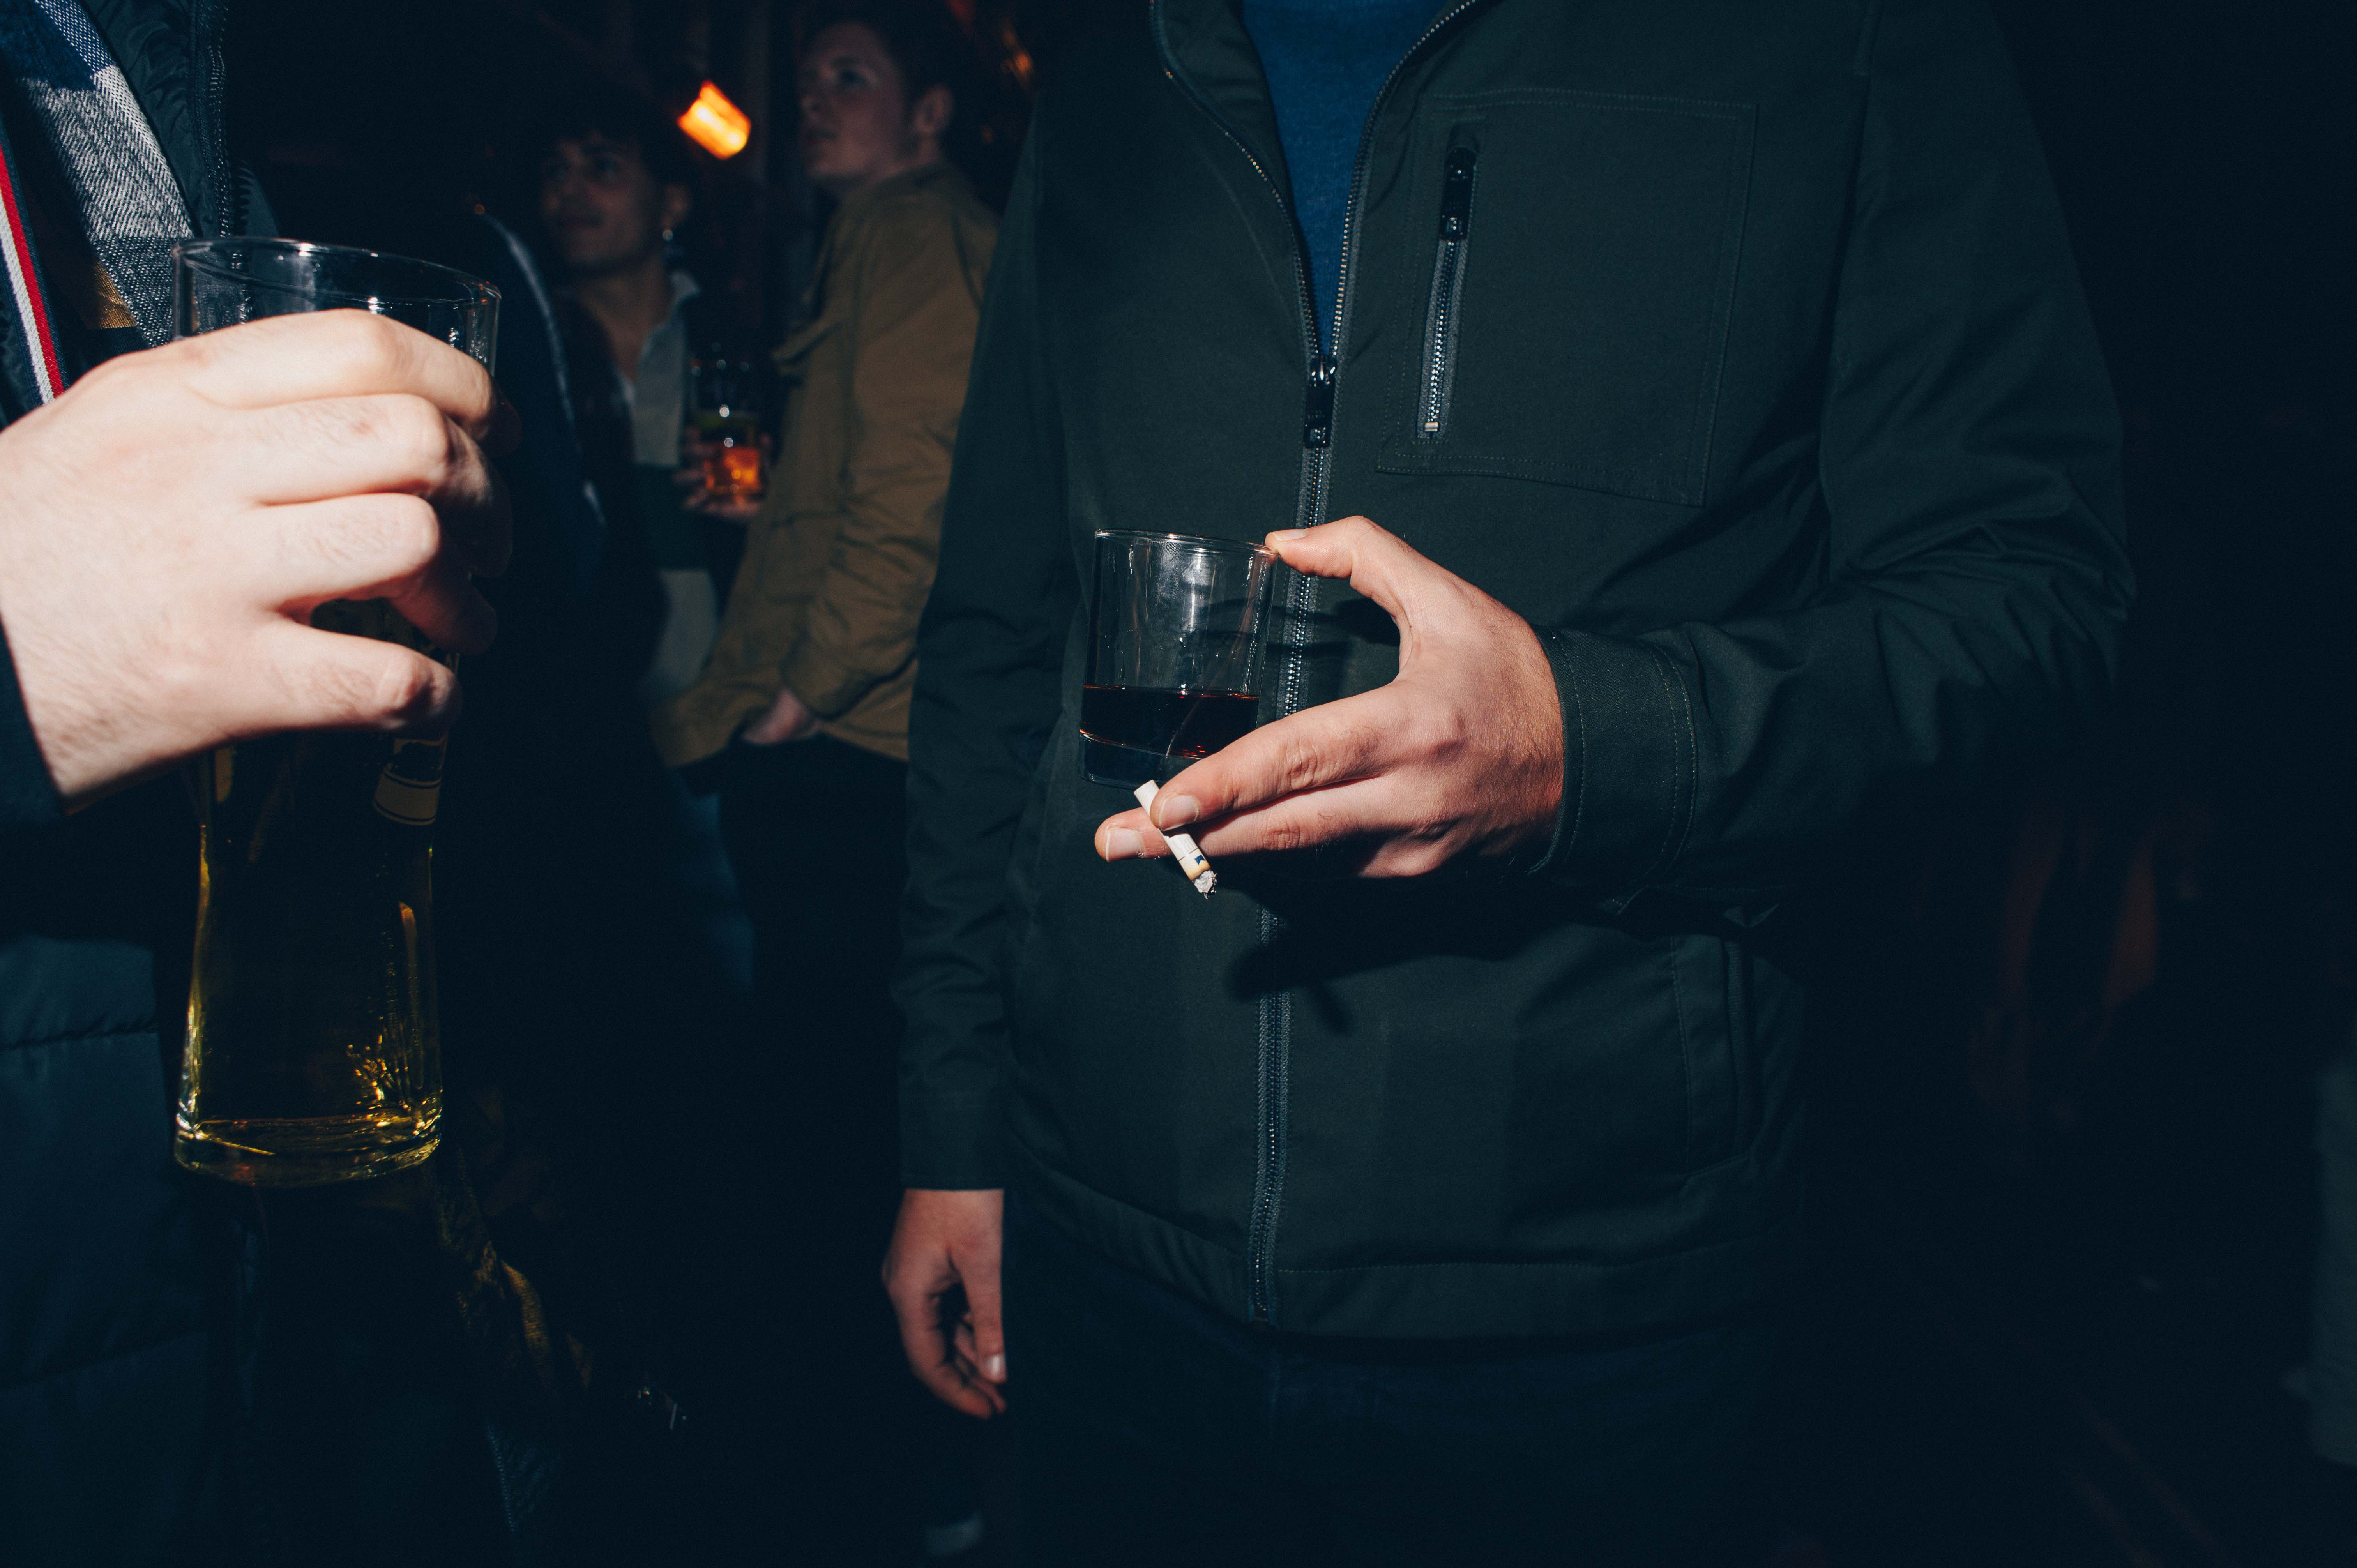 A detail shot of a man holding a small glass of alcohol with a cigarette in-between his fingers.